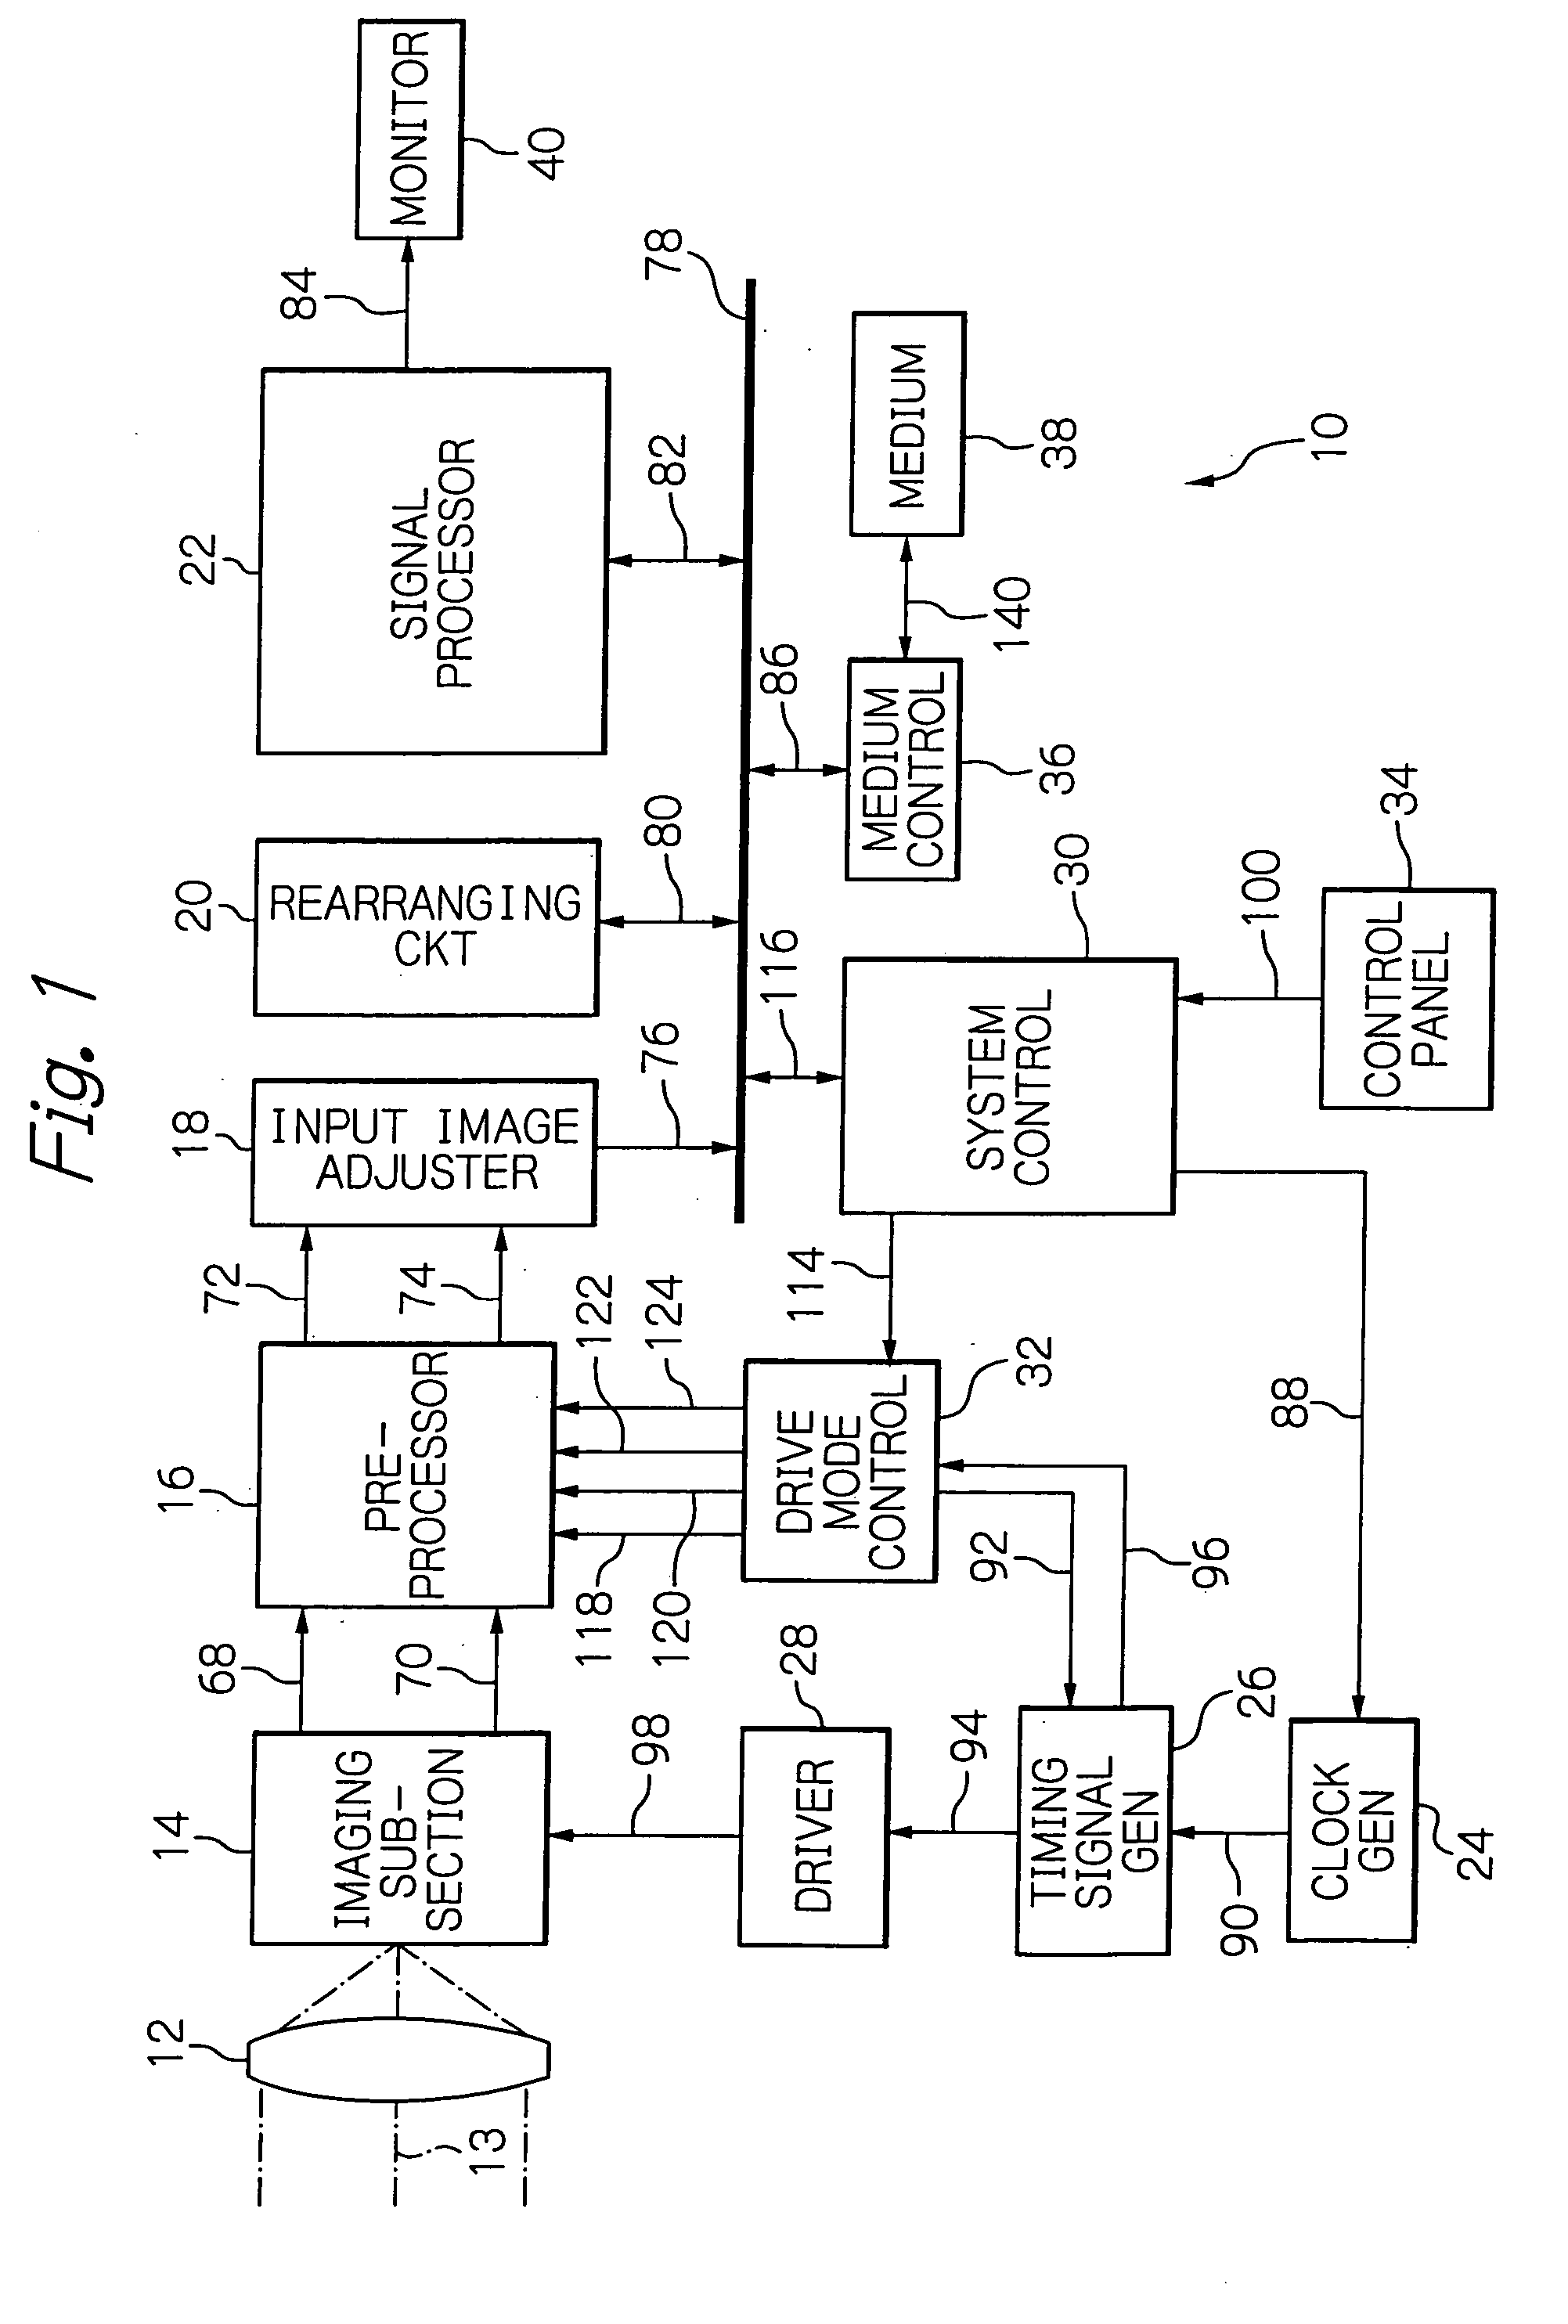 Imaging apparatus having output circuits selectably operative dependant upon usage and a method therefor